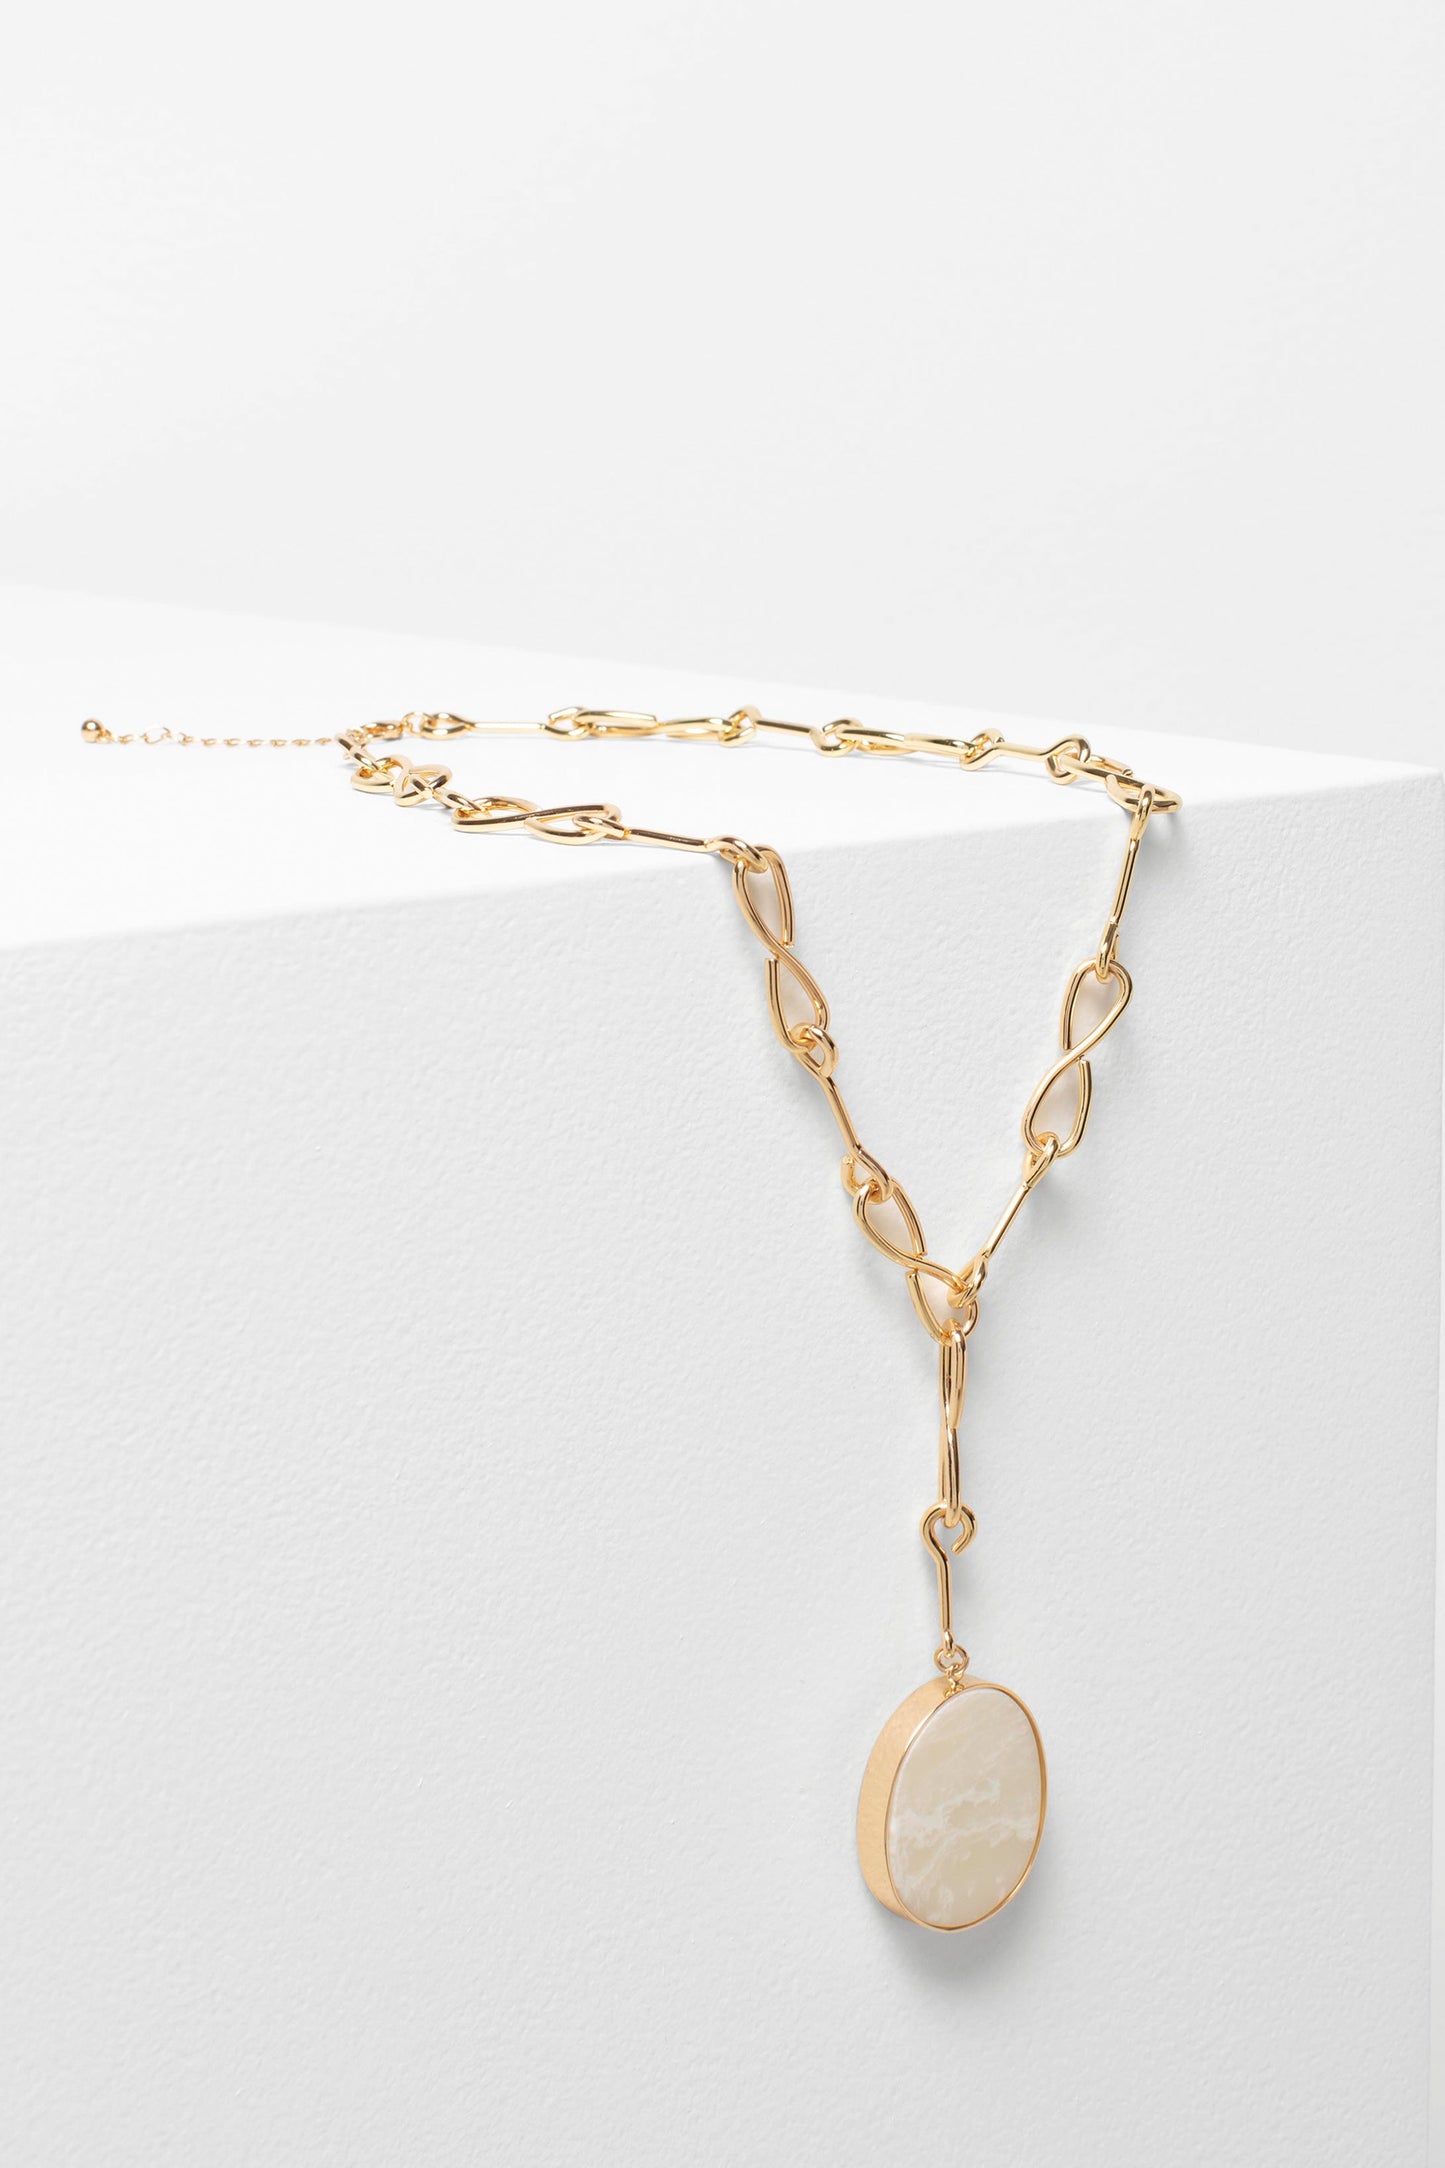 Kriis Gold Chain with Stone Pendant Necklace SAND